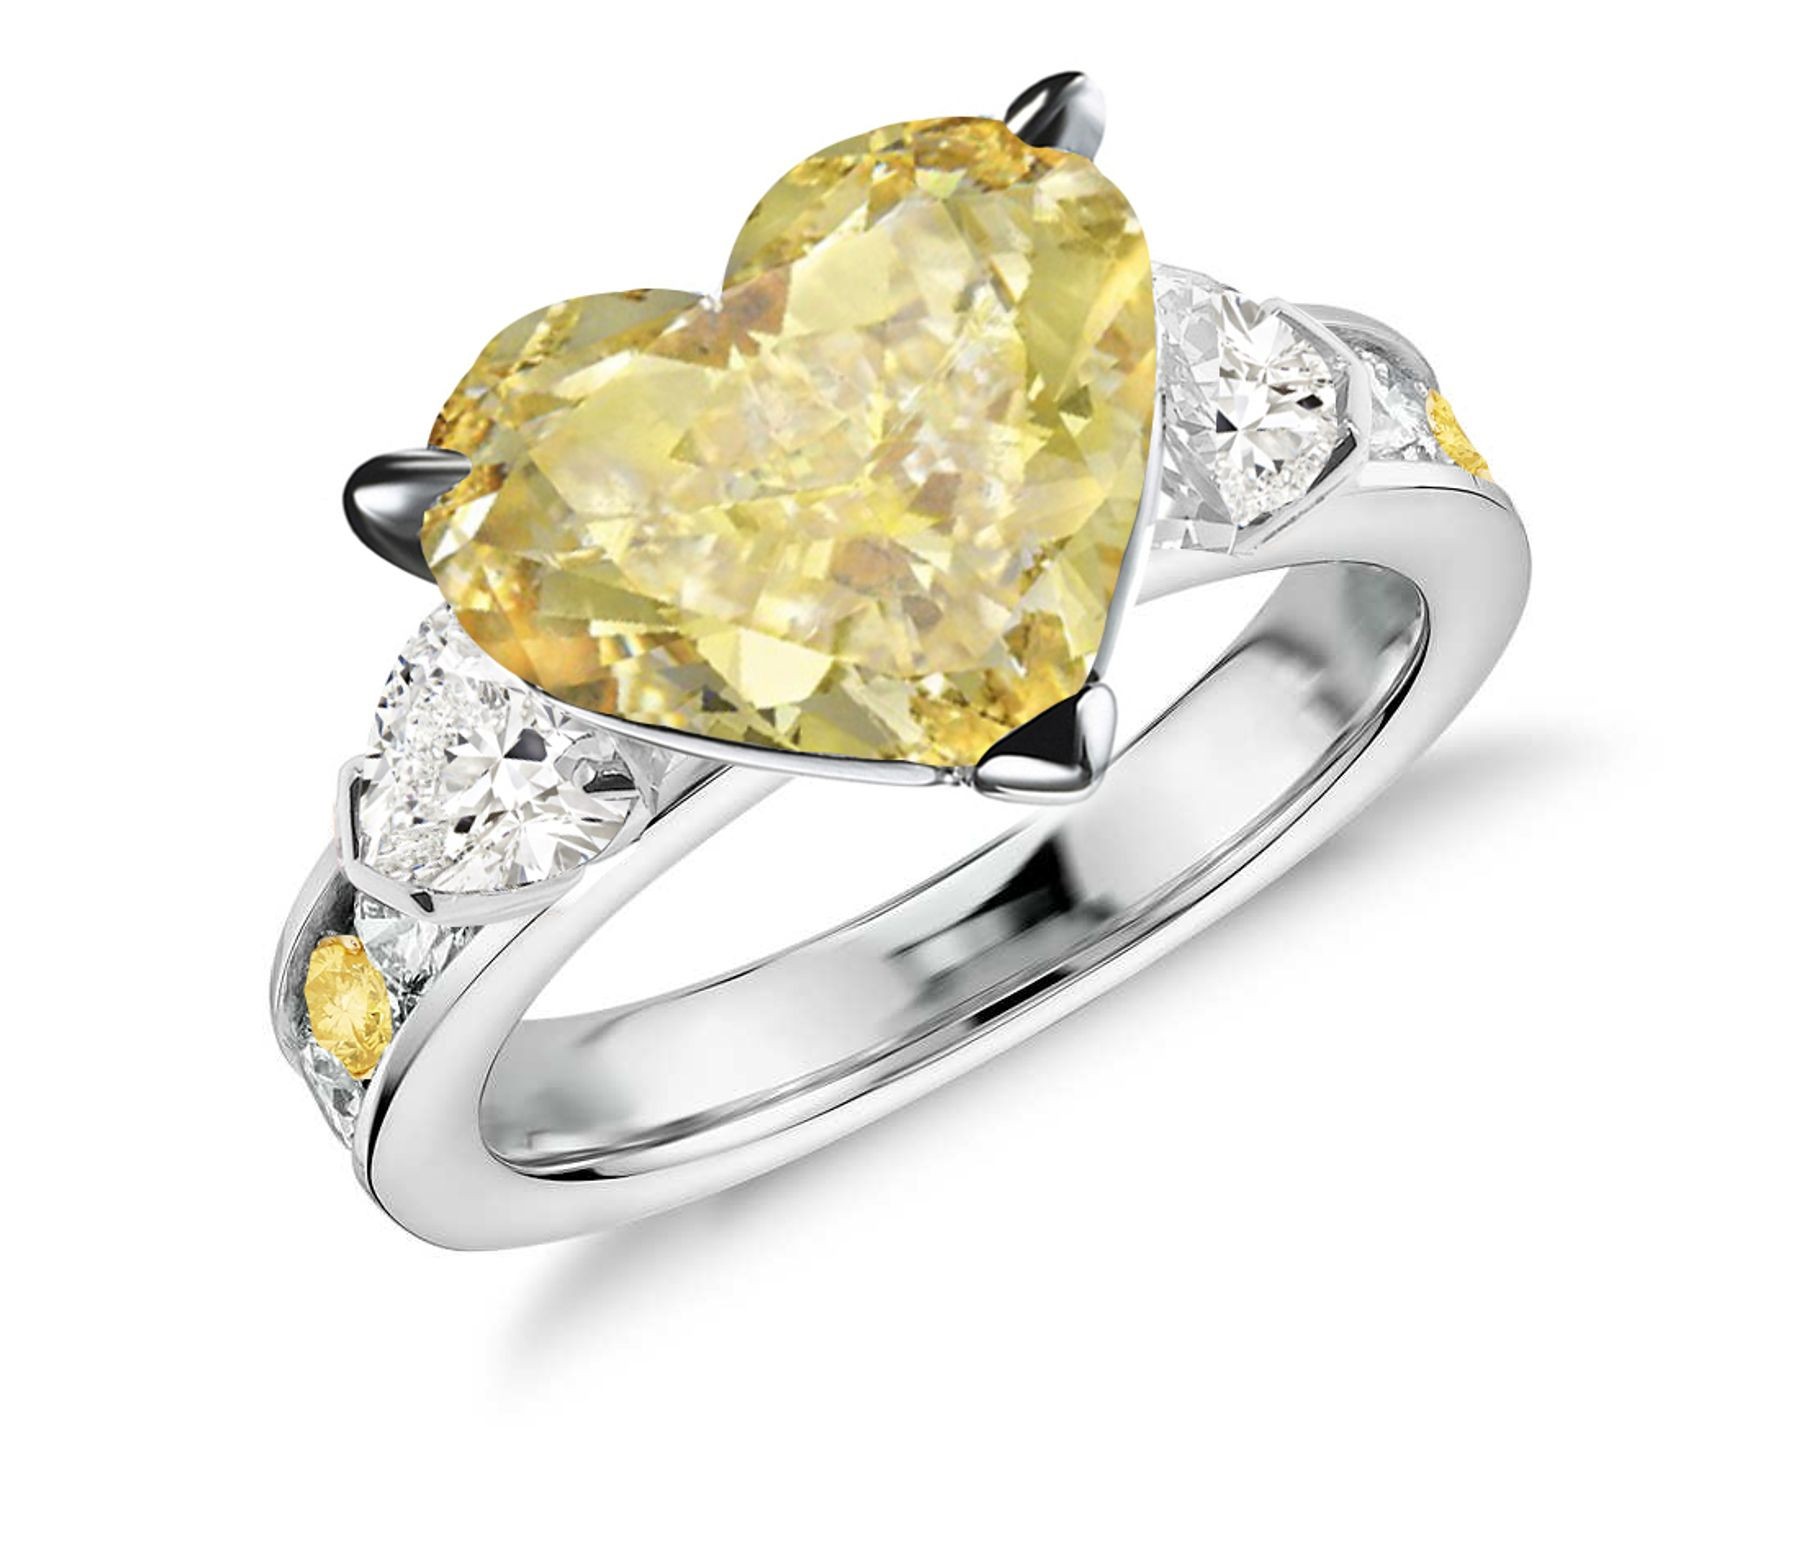 Three Stone Heart Diamond & Yelow Sapphires Rings With Further Diamond Accents